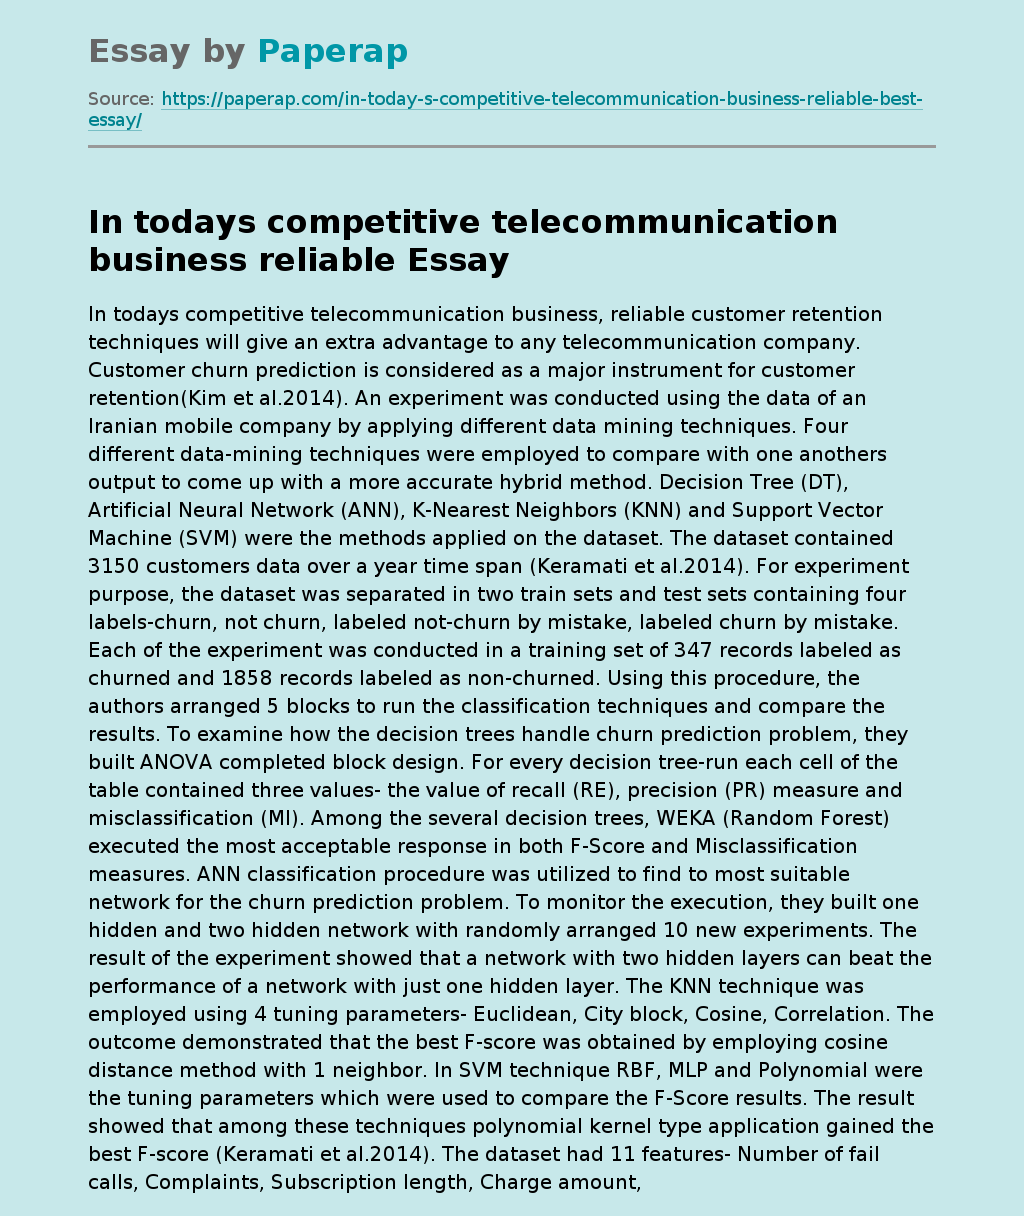 In todays competitive telecommunication business reliable